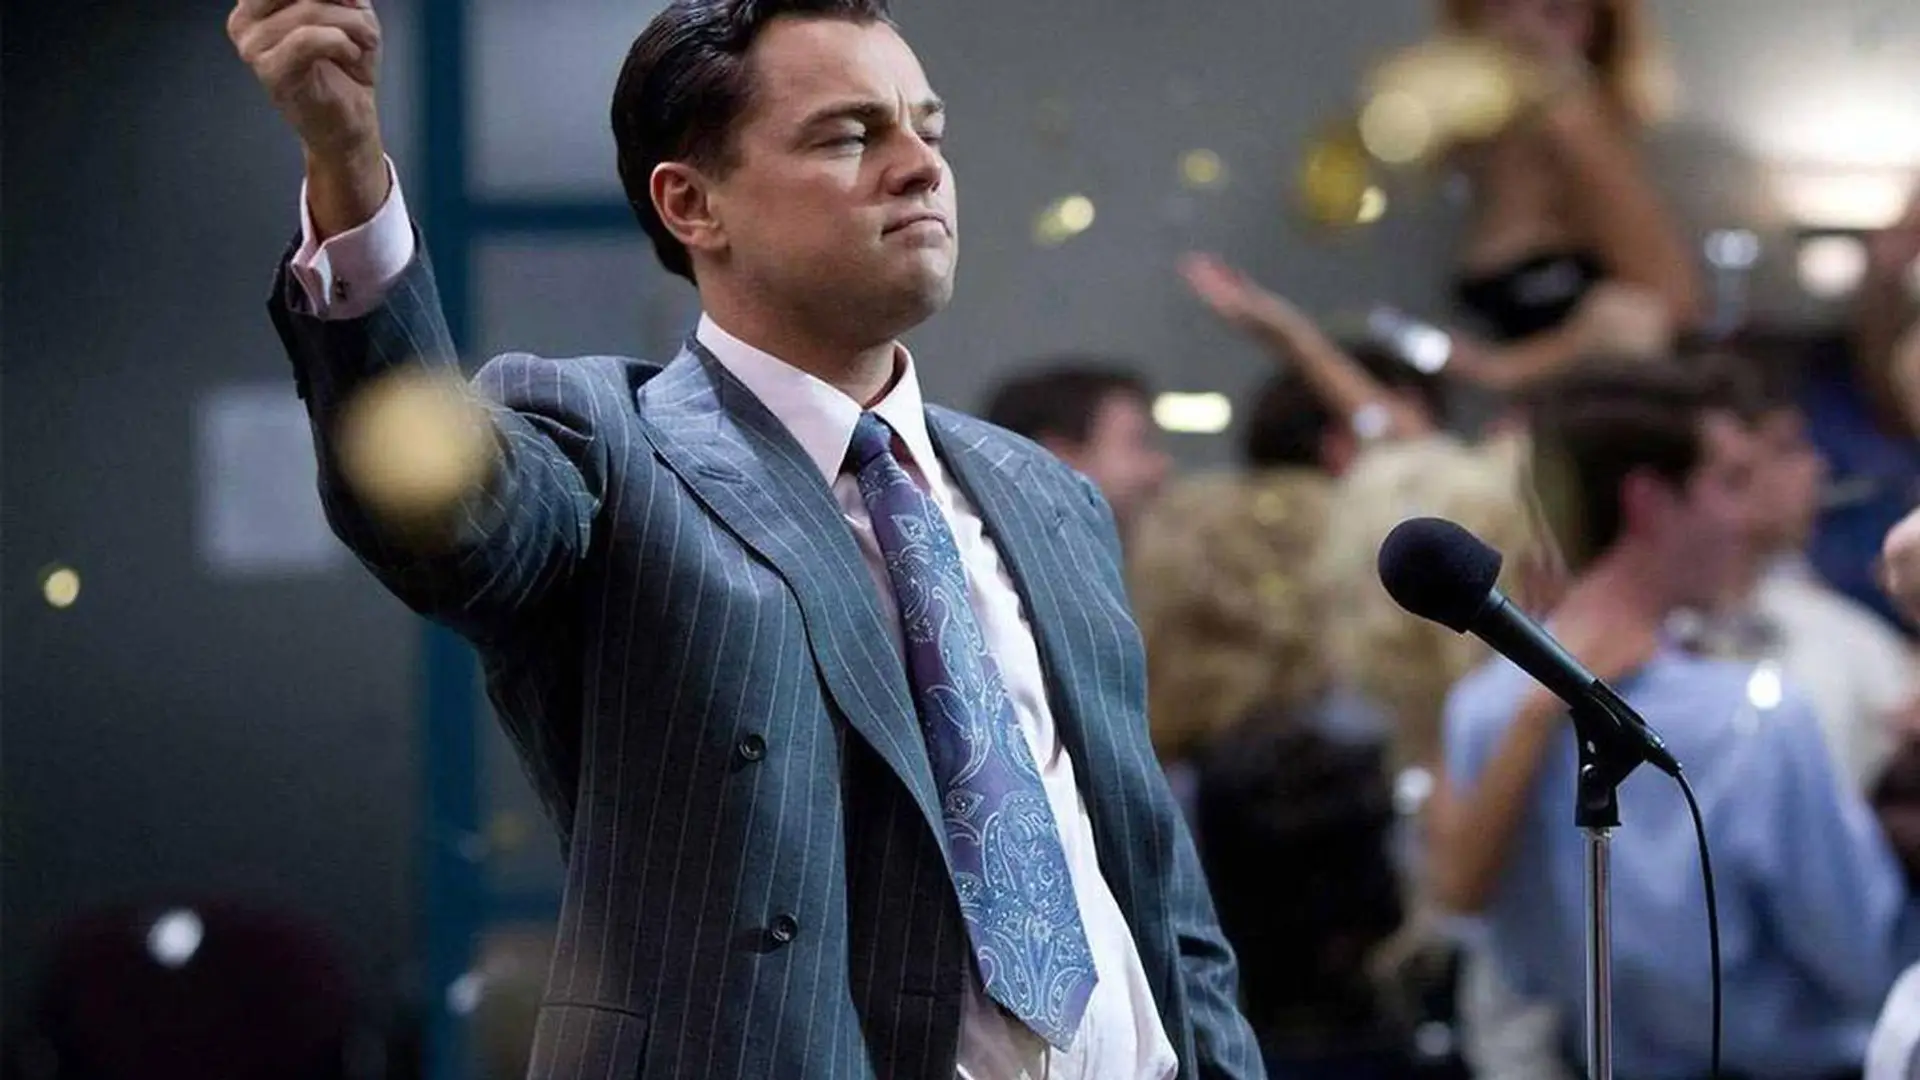 Leonardo DiCaprio's famous suit in The Wolf of Wall Street is Armani | Source: The National